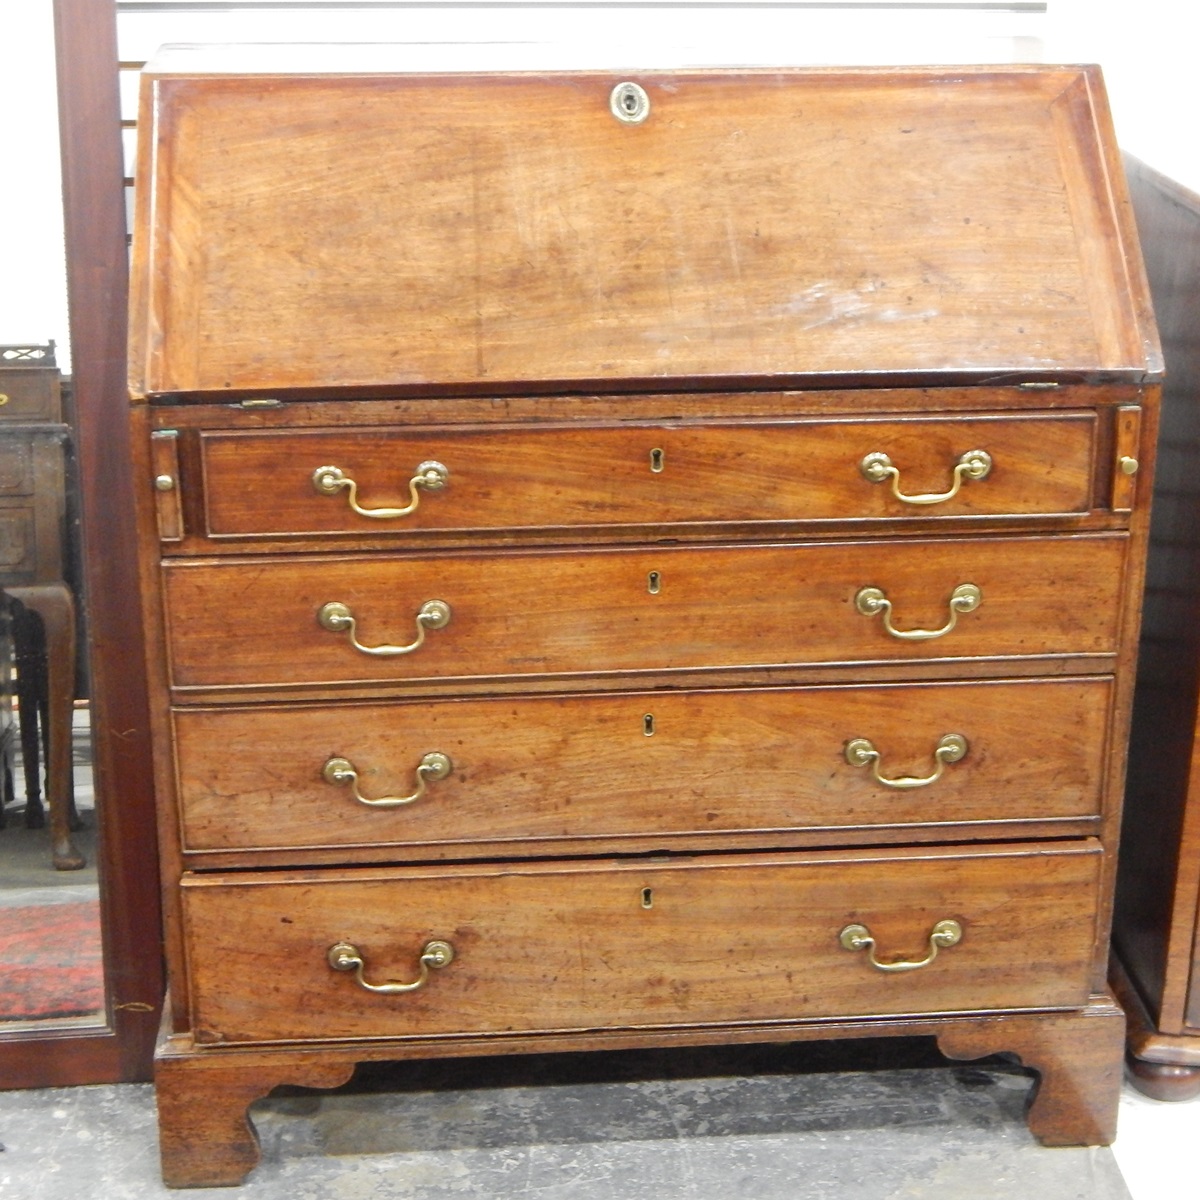 Late 18th/early 19th century mahogany bureau with fitted interior,